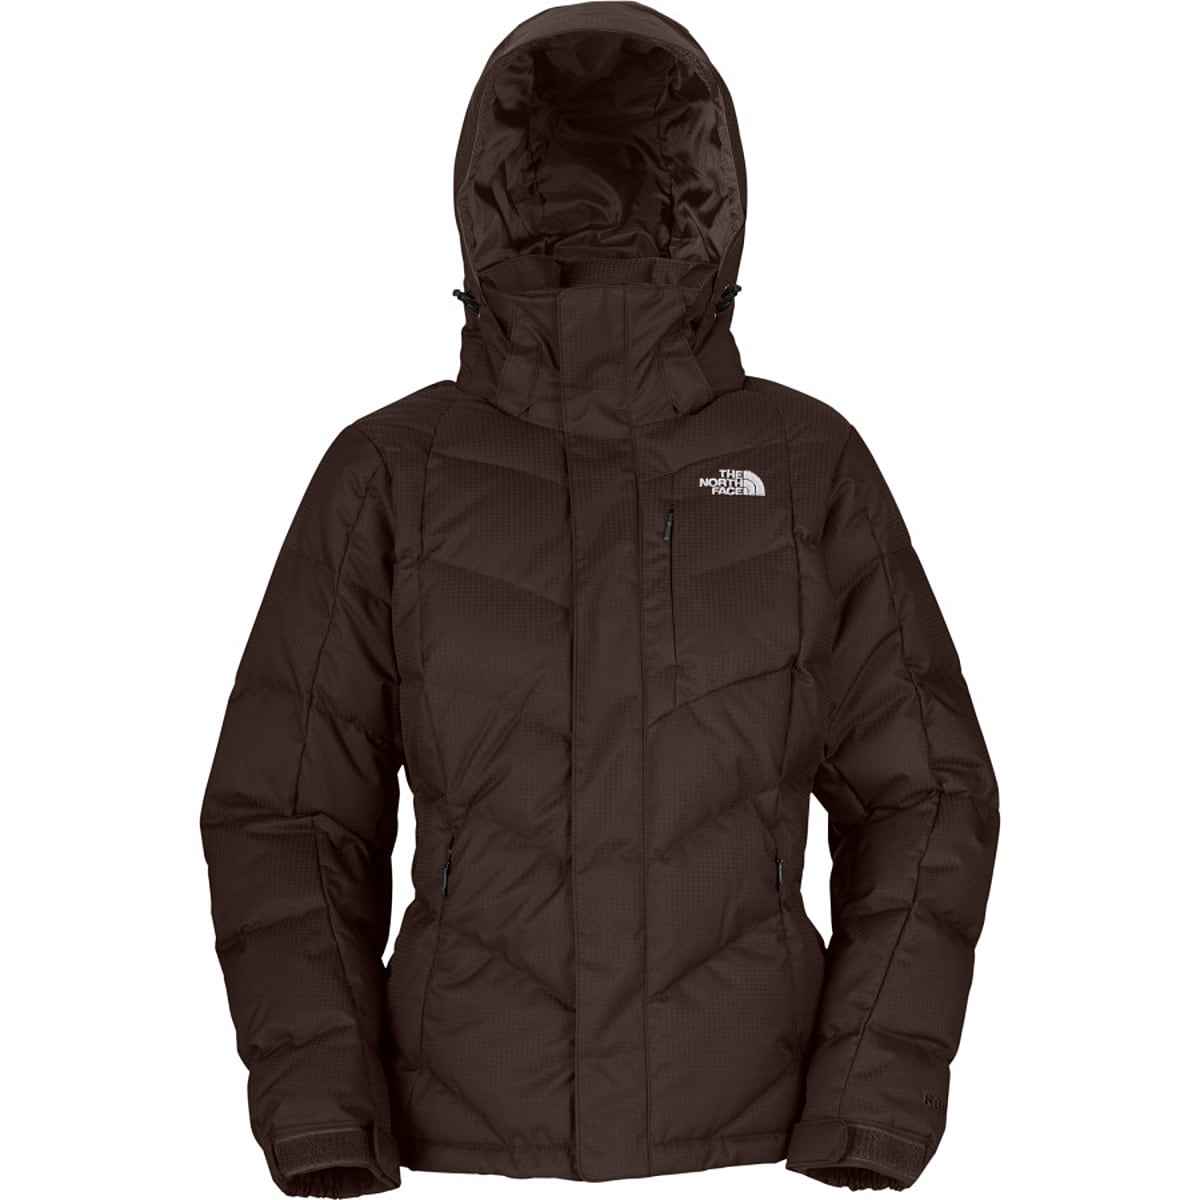 The North Face Amore Down Jacket - Women's - Clothing